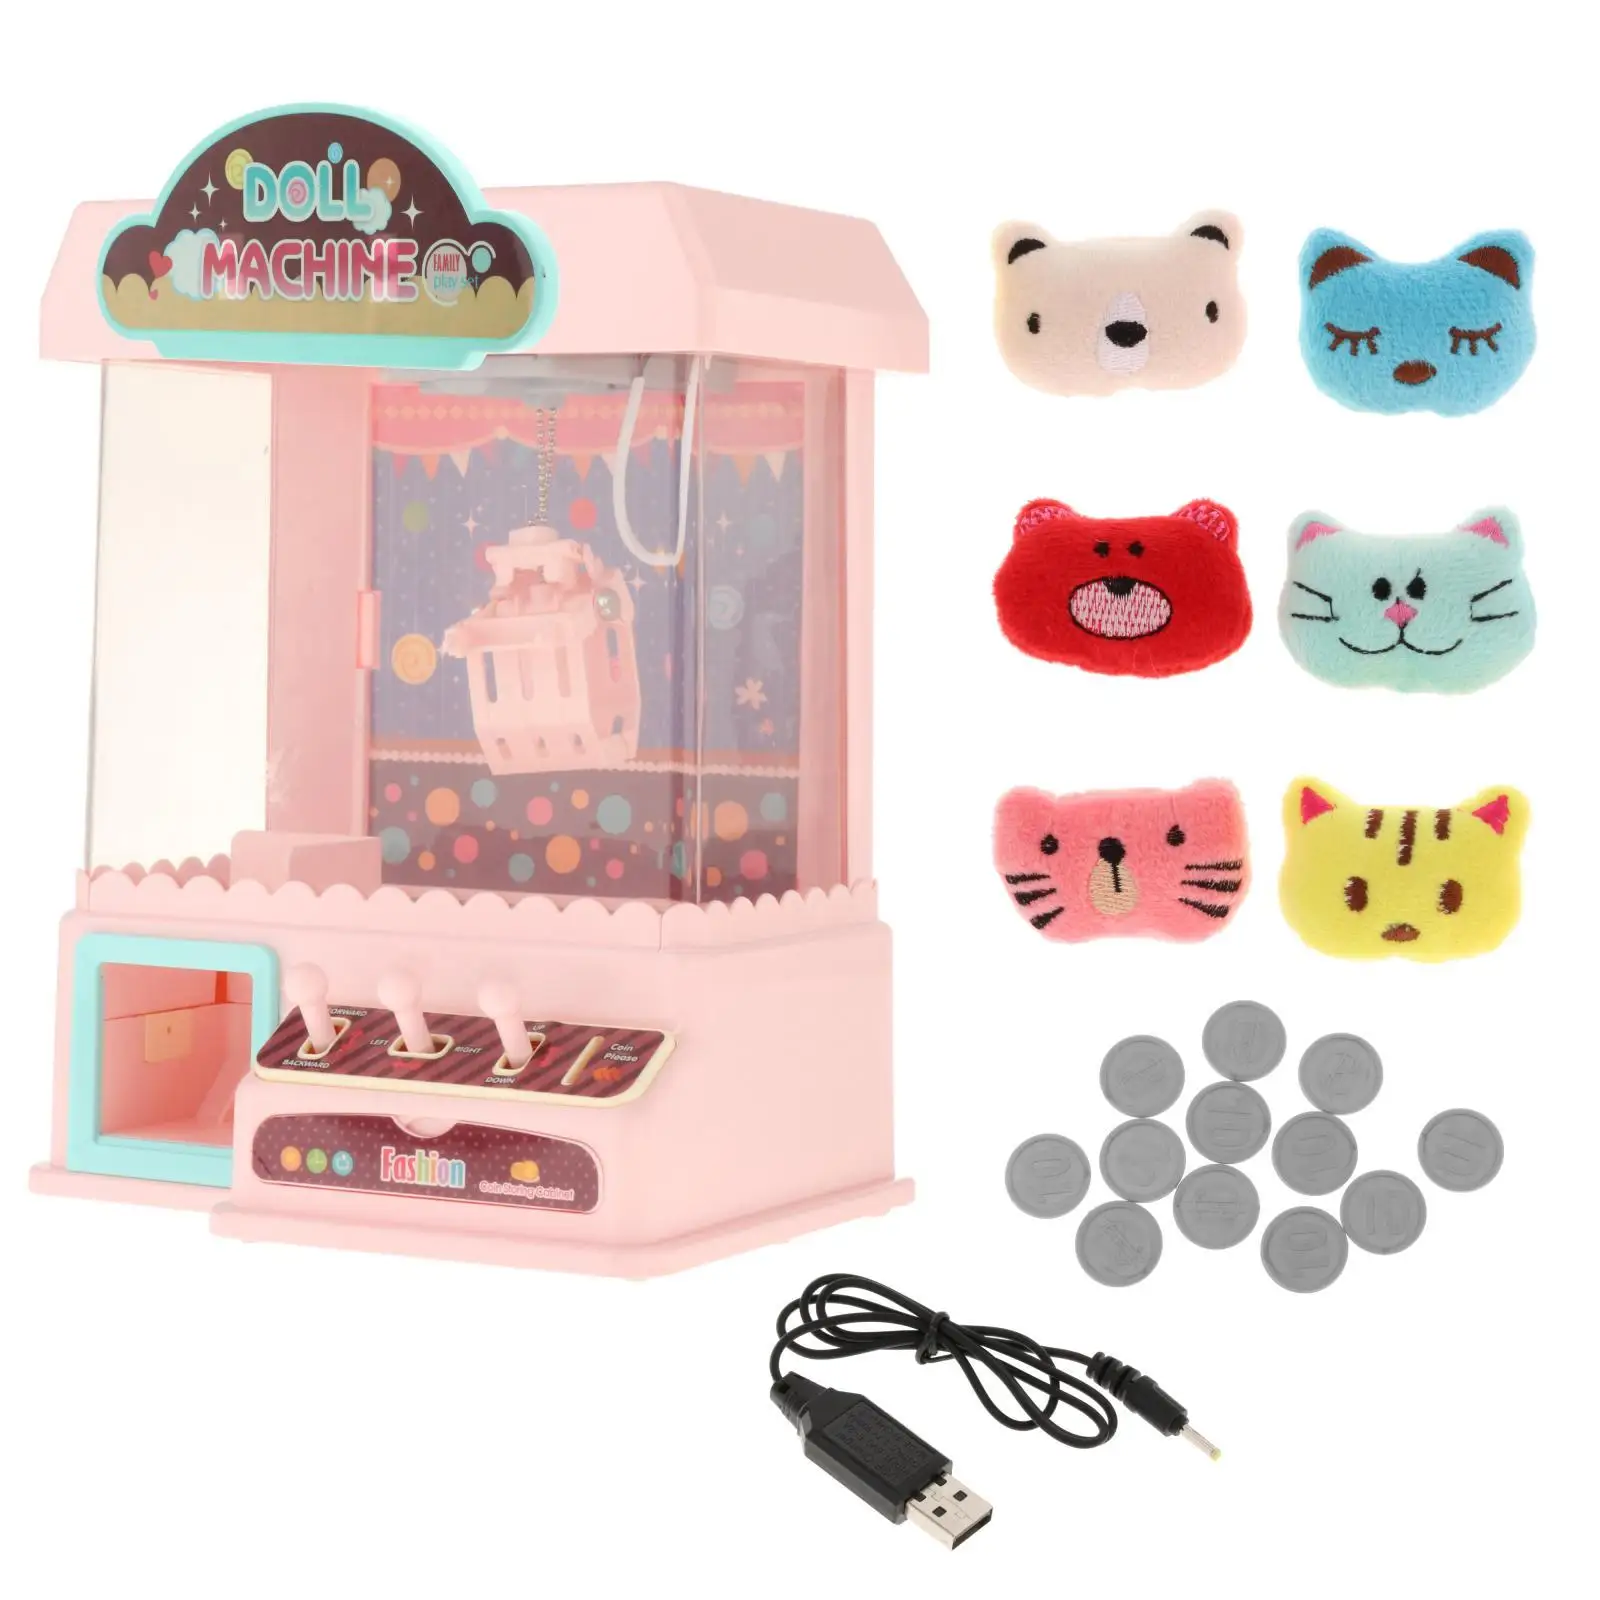 Electronic Claw Game Play House Dollhouse Gifts and 10 Capsules with Lights & Sounds Vending Grabber Machine for Children Kids